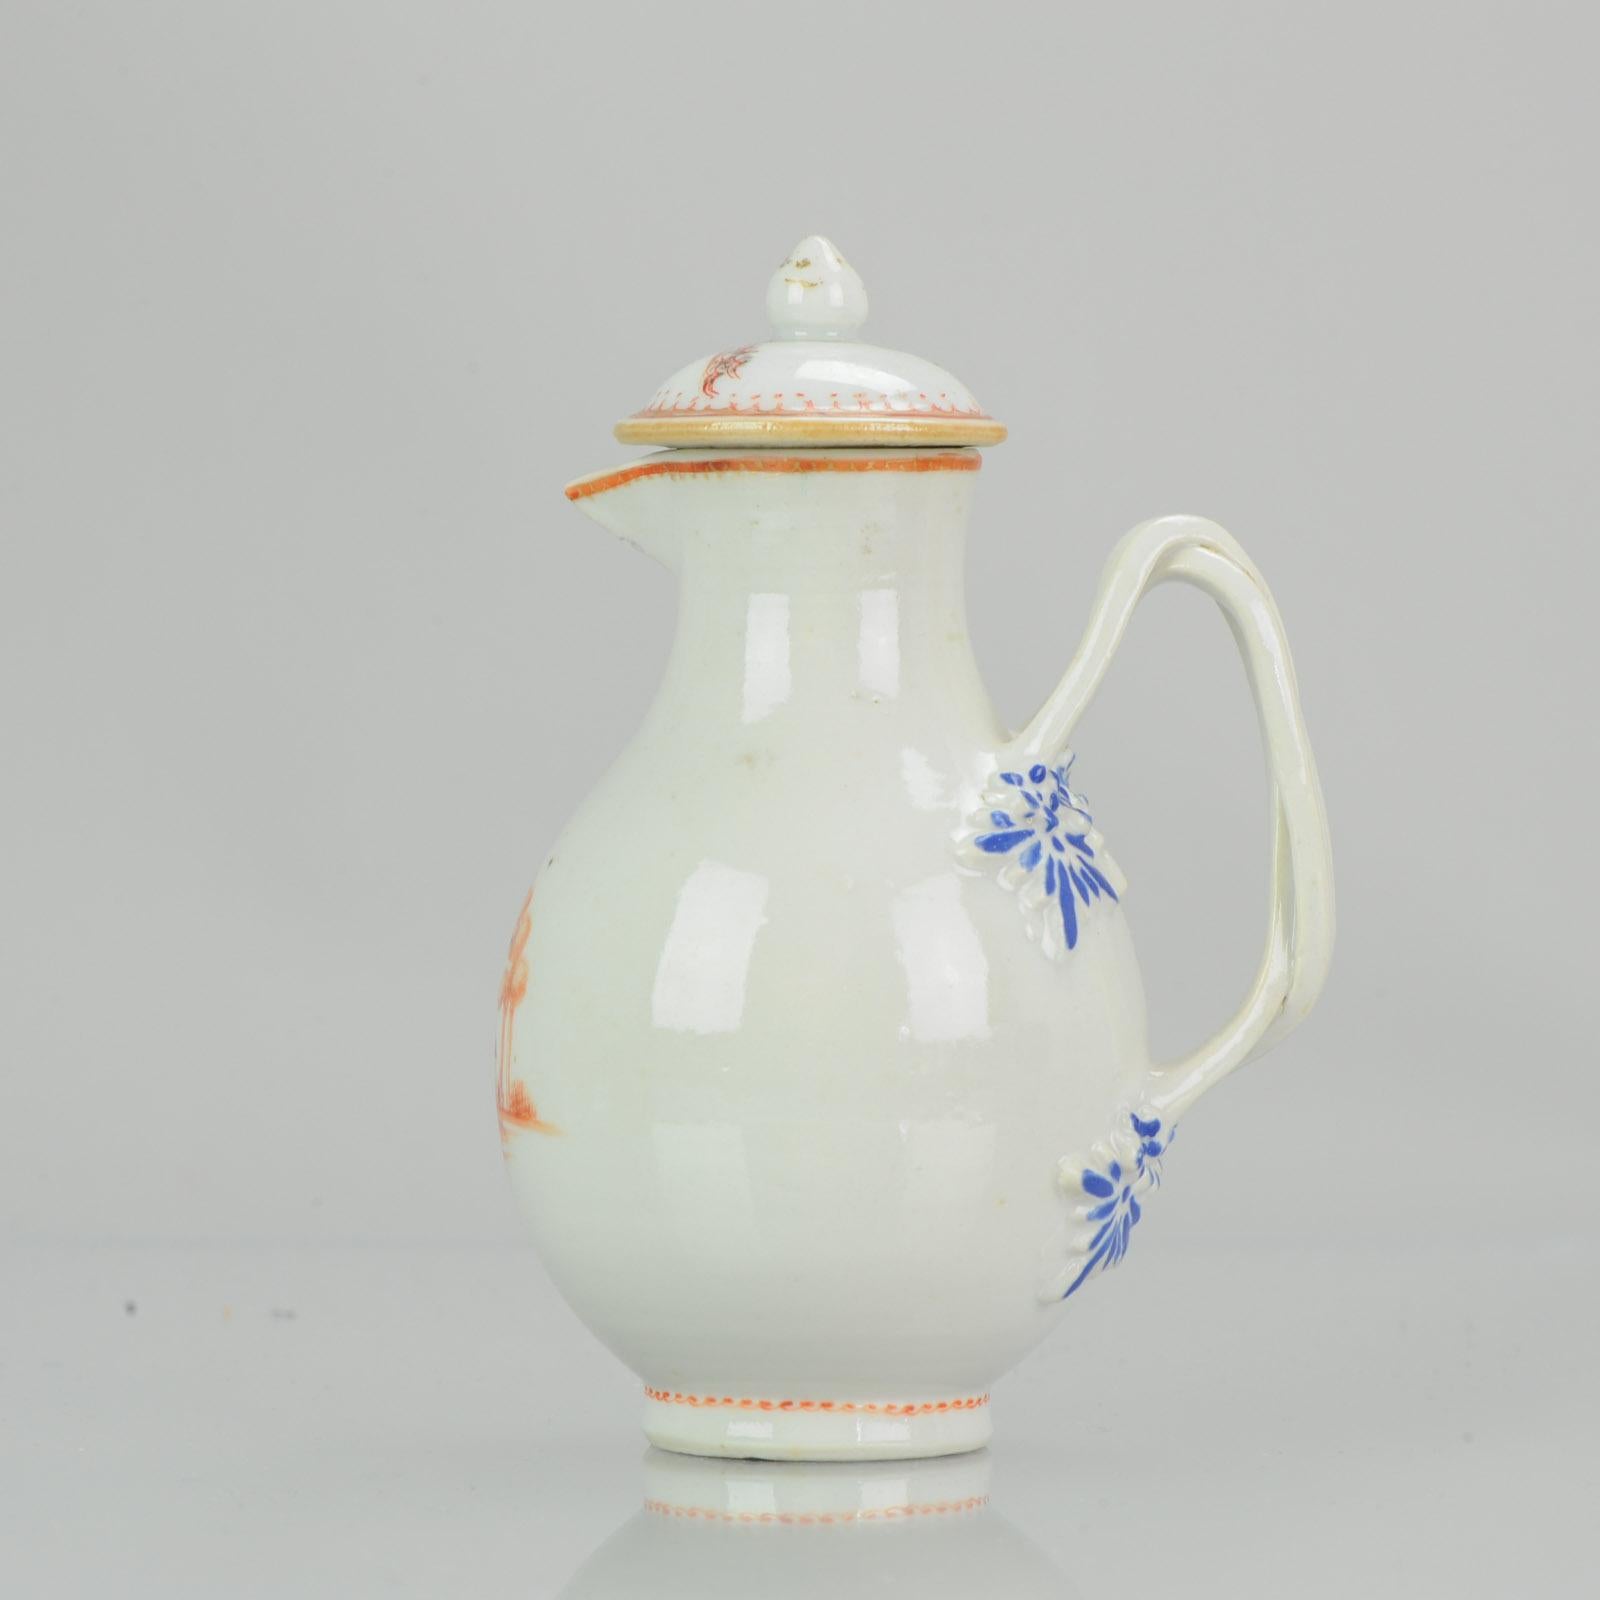 Chinese Antique Lovely Lidded Jug Qing Porcelain Chine de Commande Sepia, 18th C For Sale